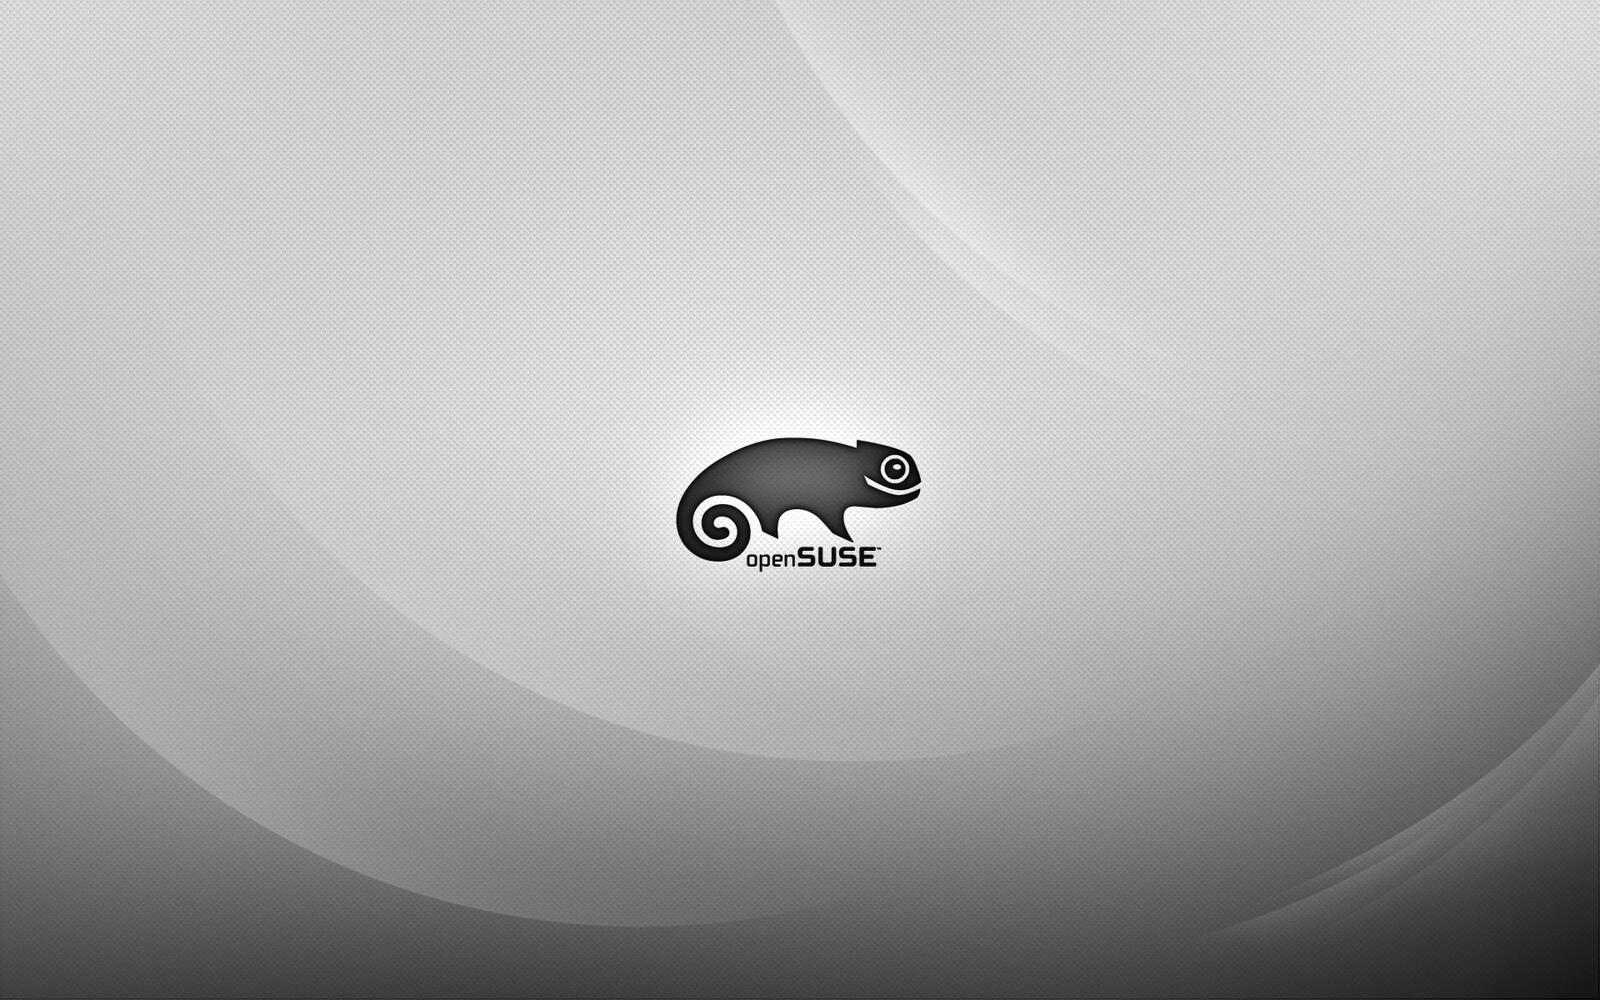 Wallpapers linux oc opensuse on the desktop